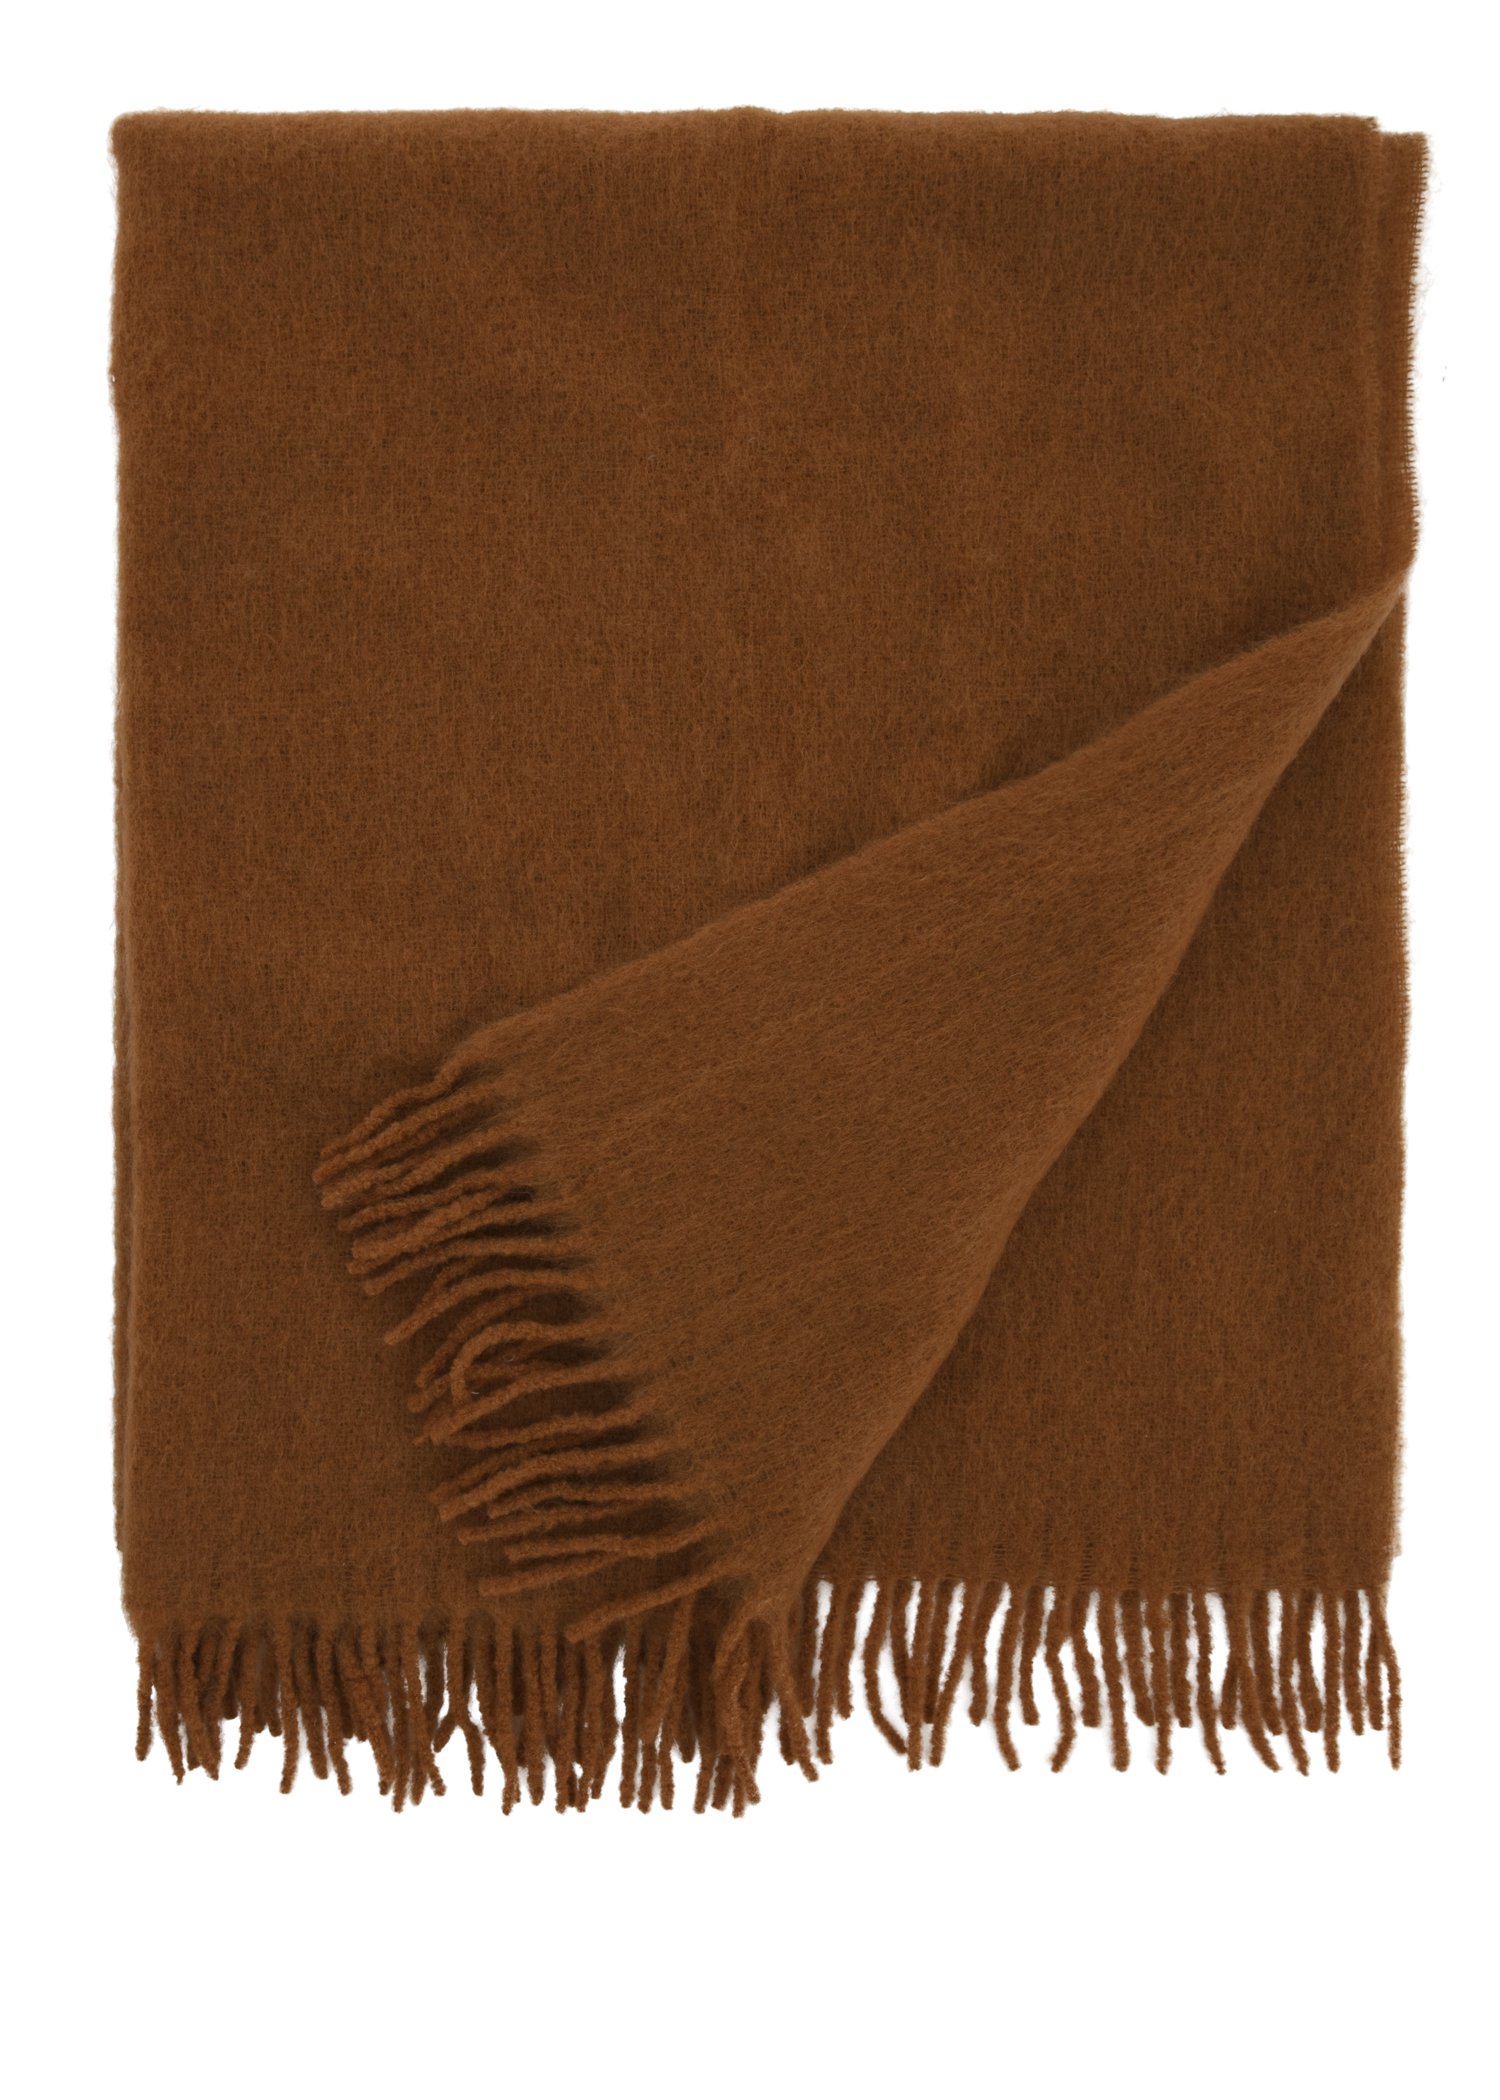 Brown blanket with fringes